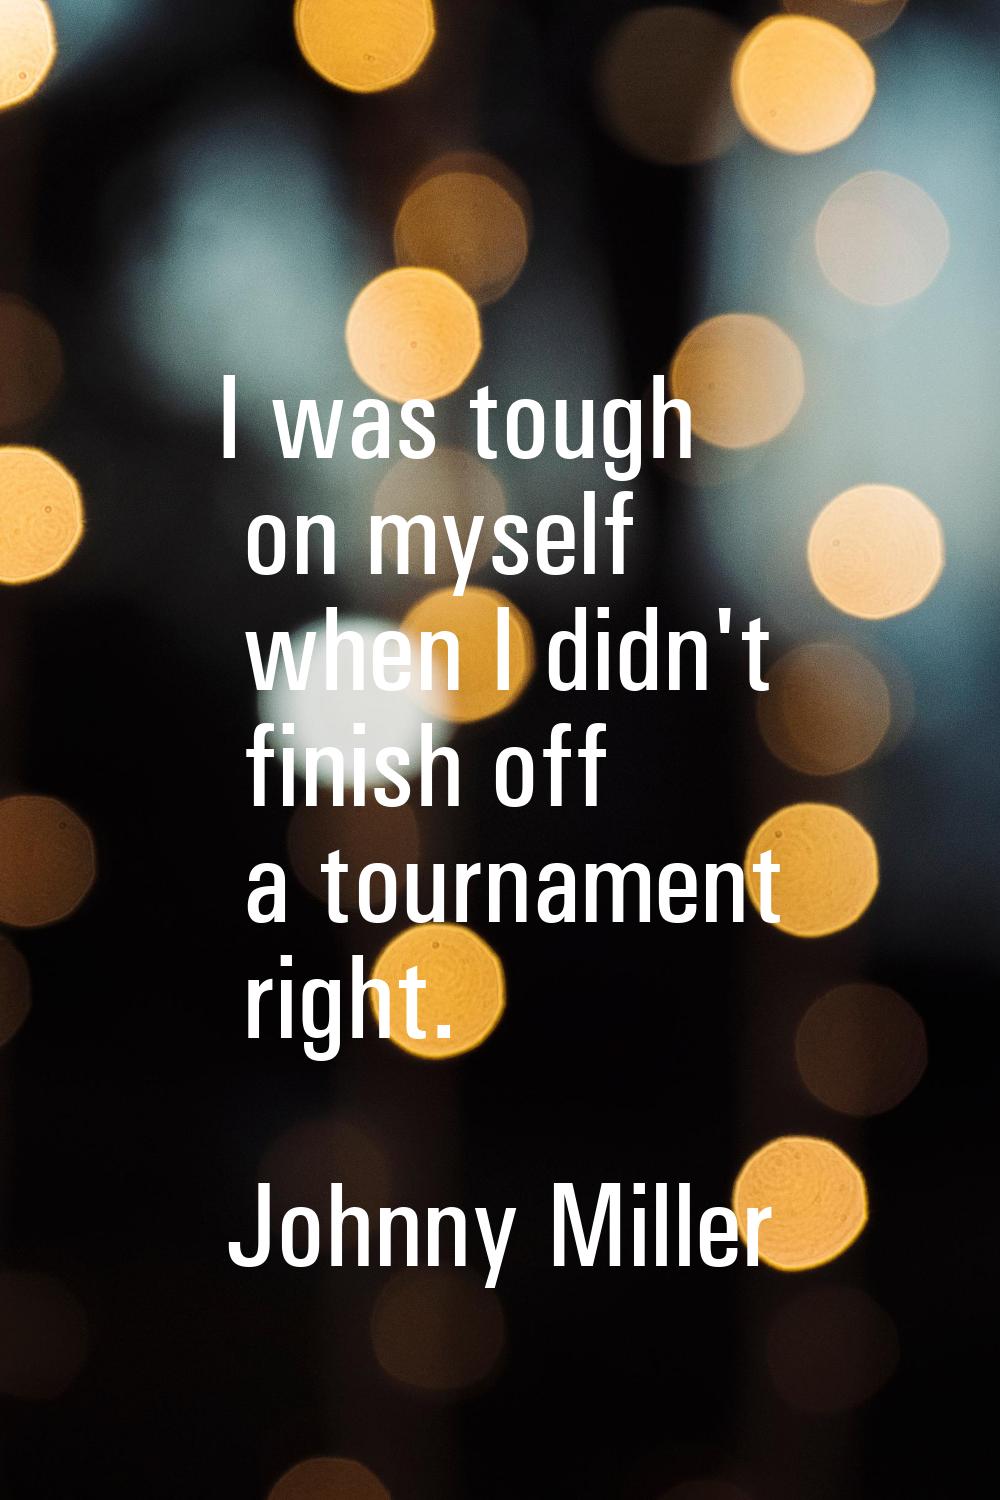 I was tough on myself when I didn't finish off a tournament right.